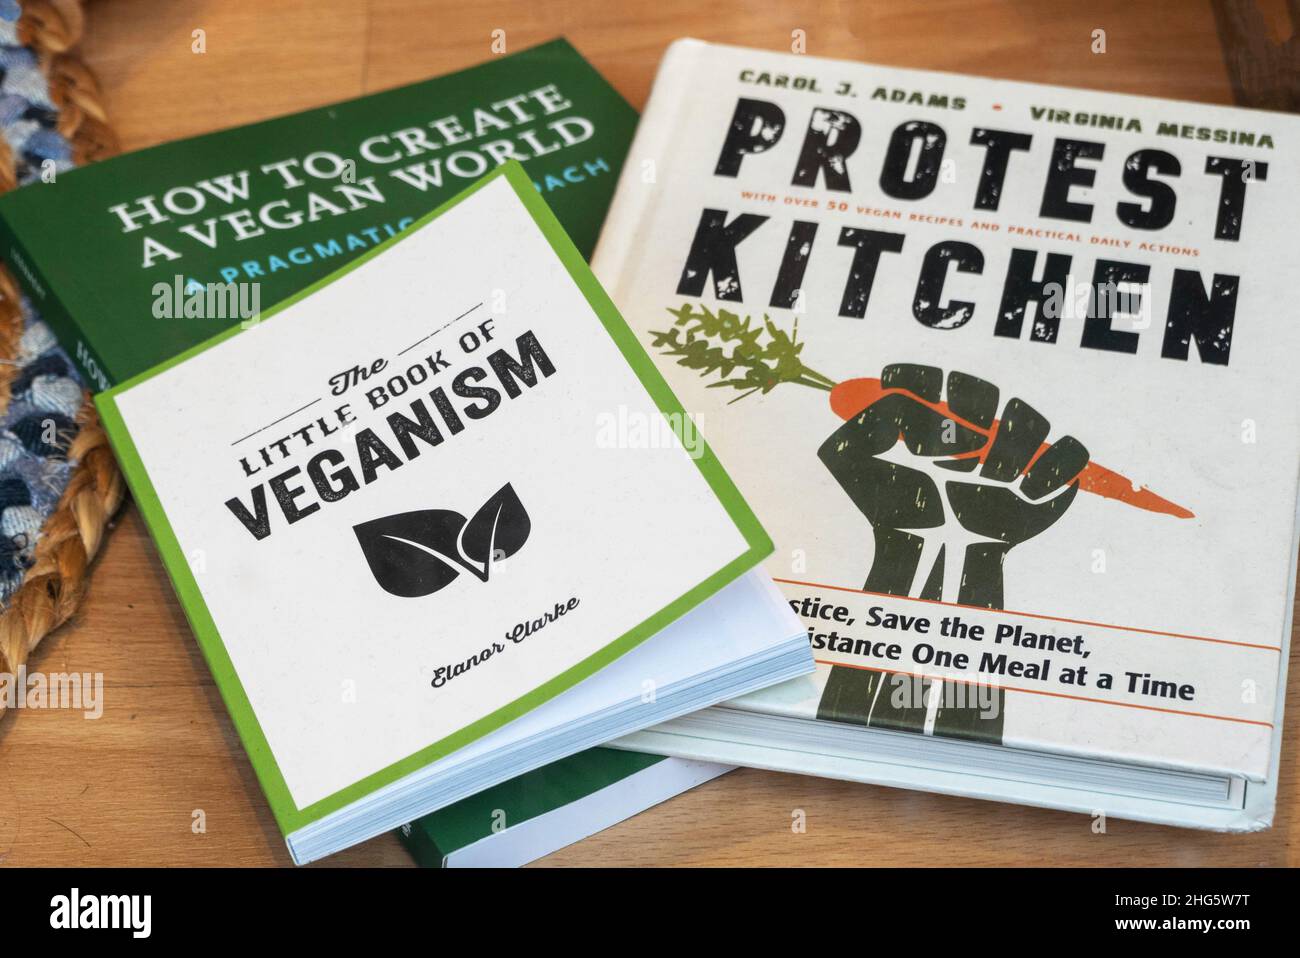 Books on veganism for people interested in vegan cooking and lifestyle Stock Photo